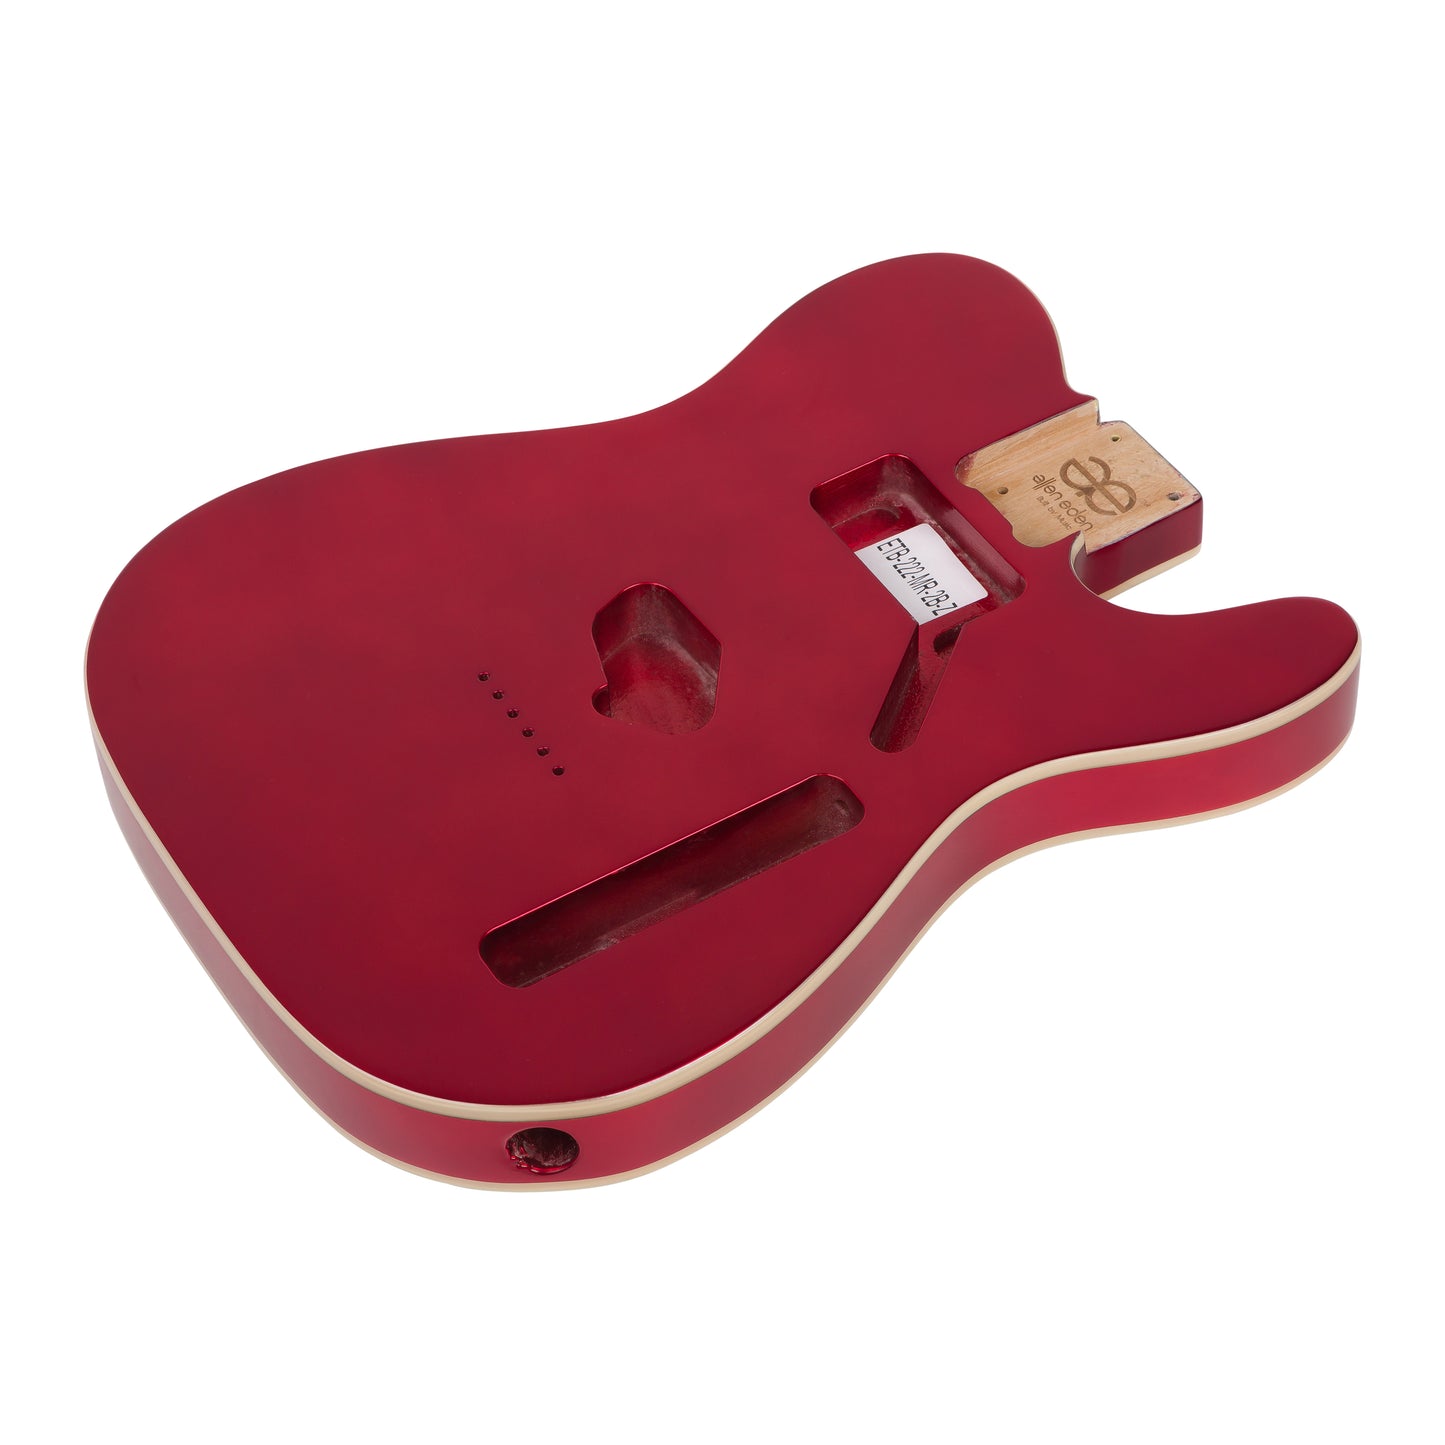 AE Guitars® T-Style Alder Replacement Guitar Body Metallic Red with Binding